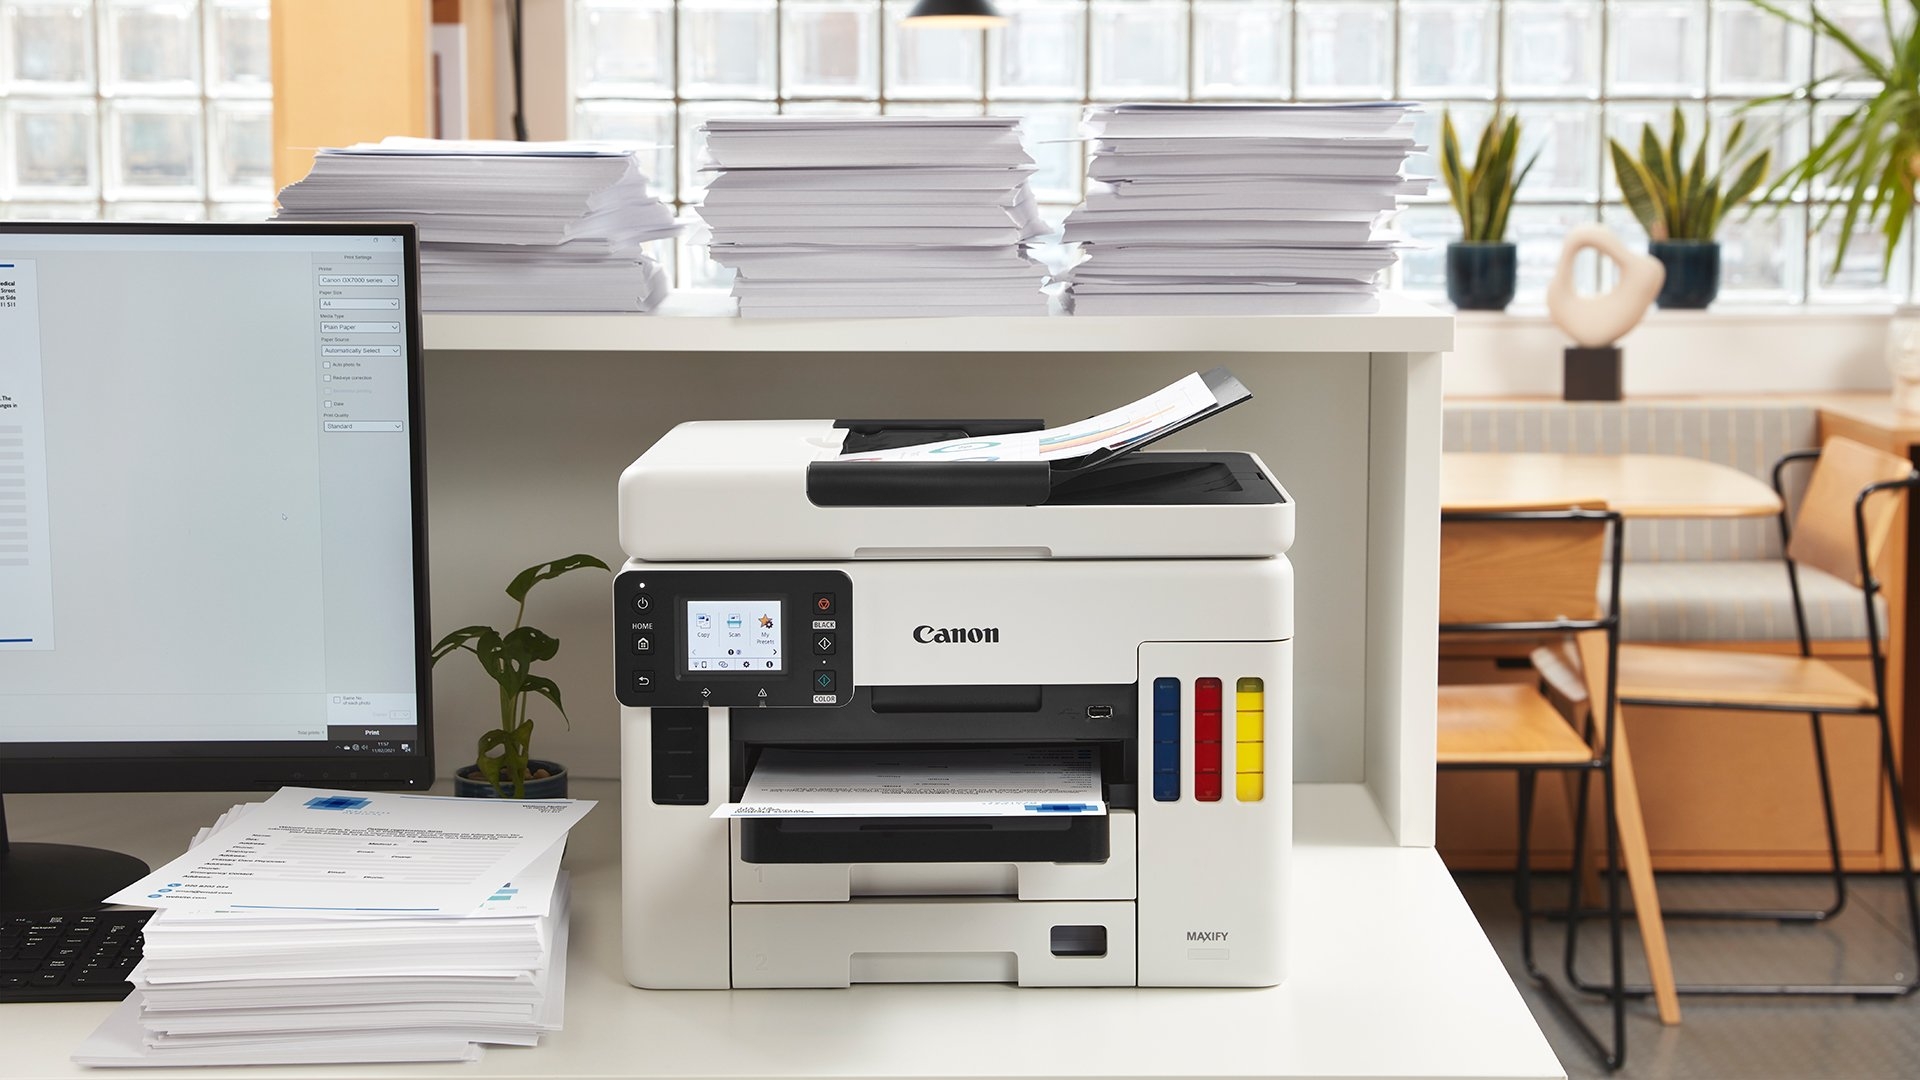 Useful Tips to Find the Most Suitable Printer for Your Office